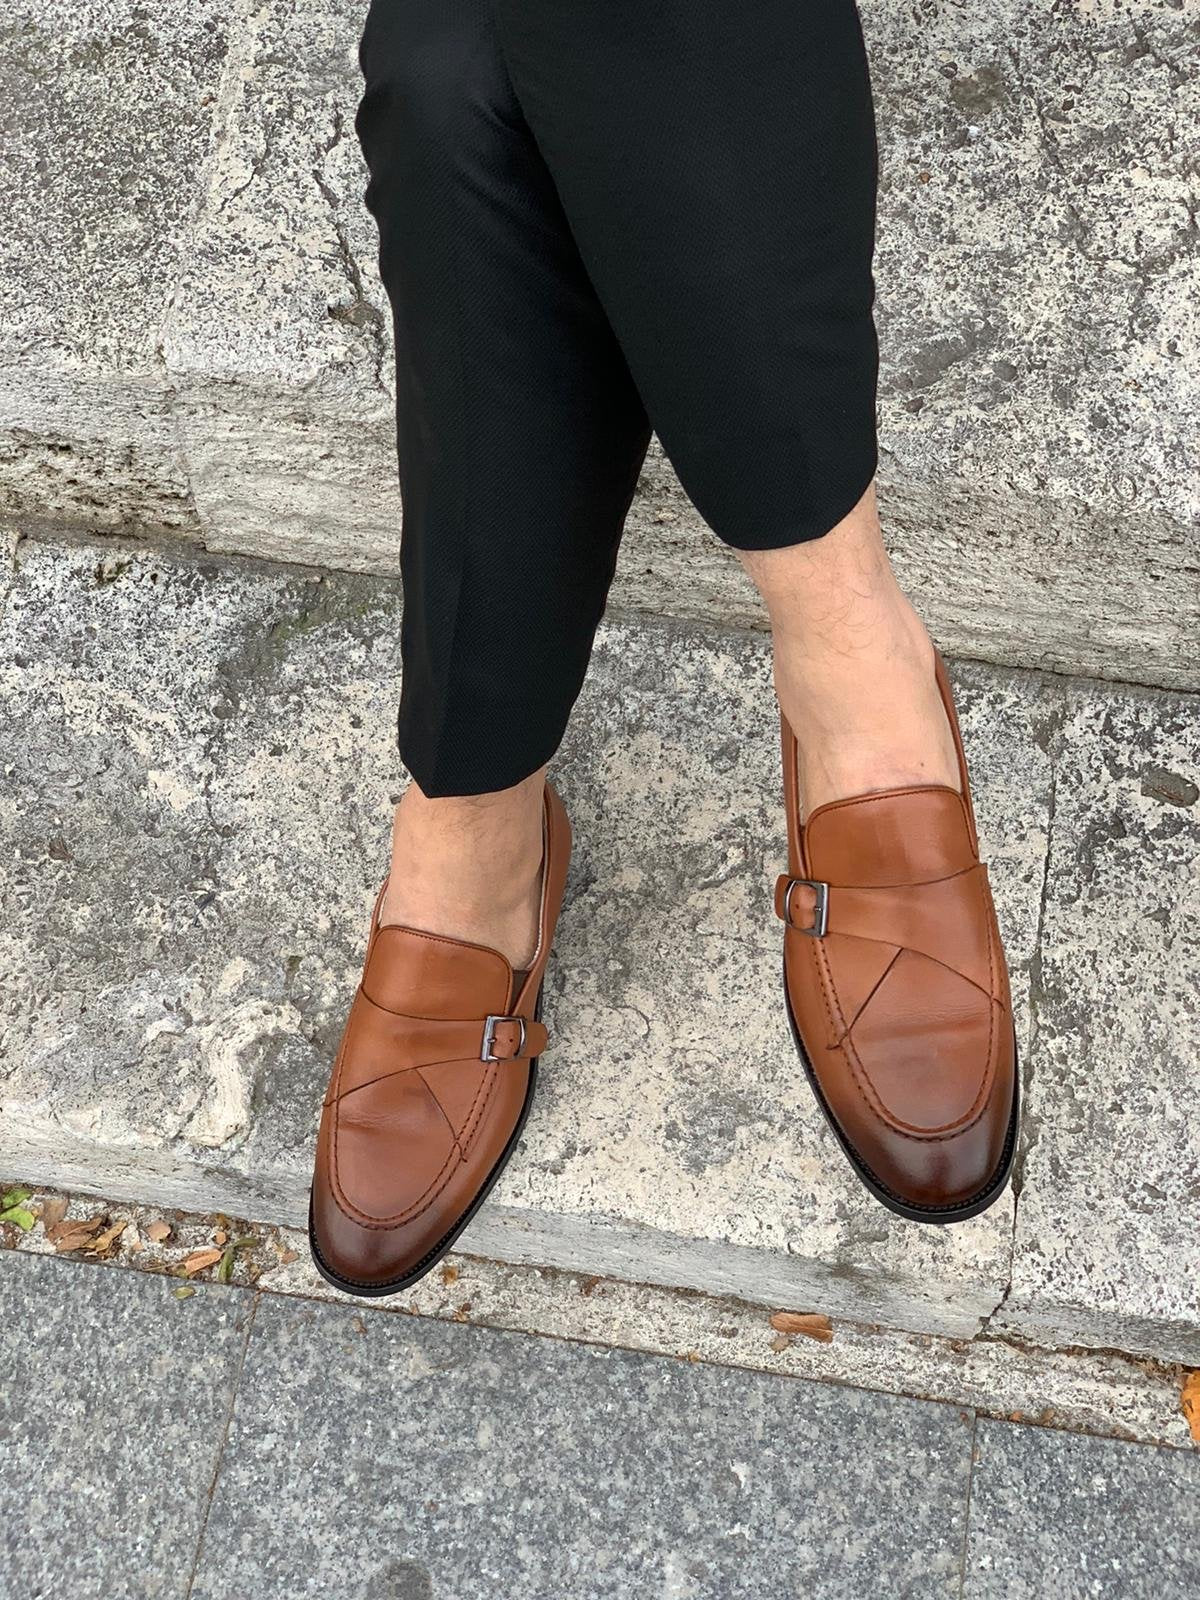 Stanoss Tan Buckle Shoes